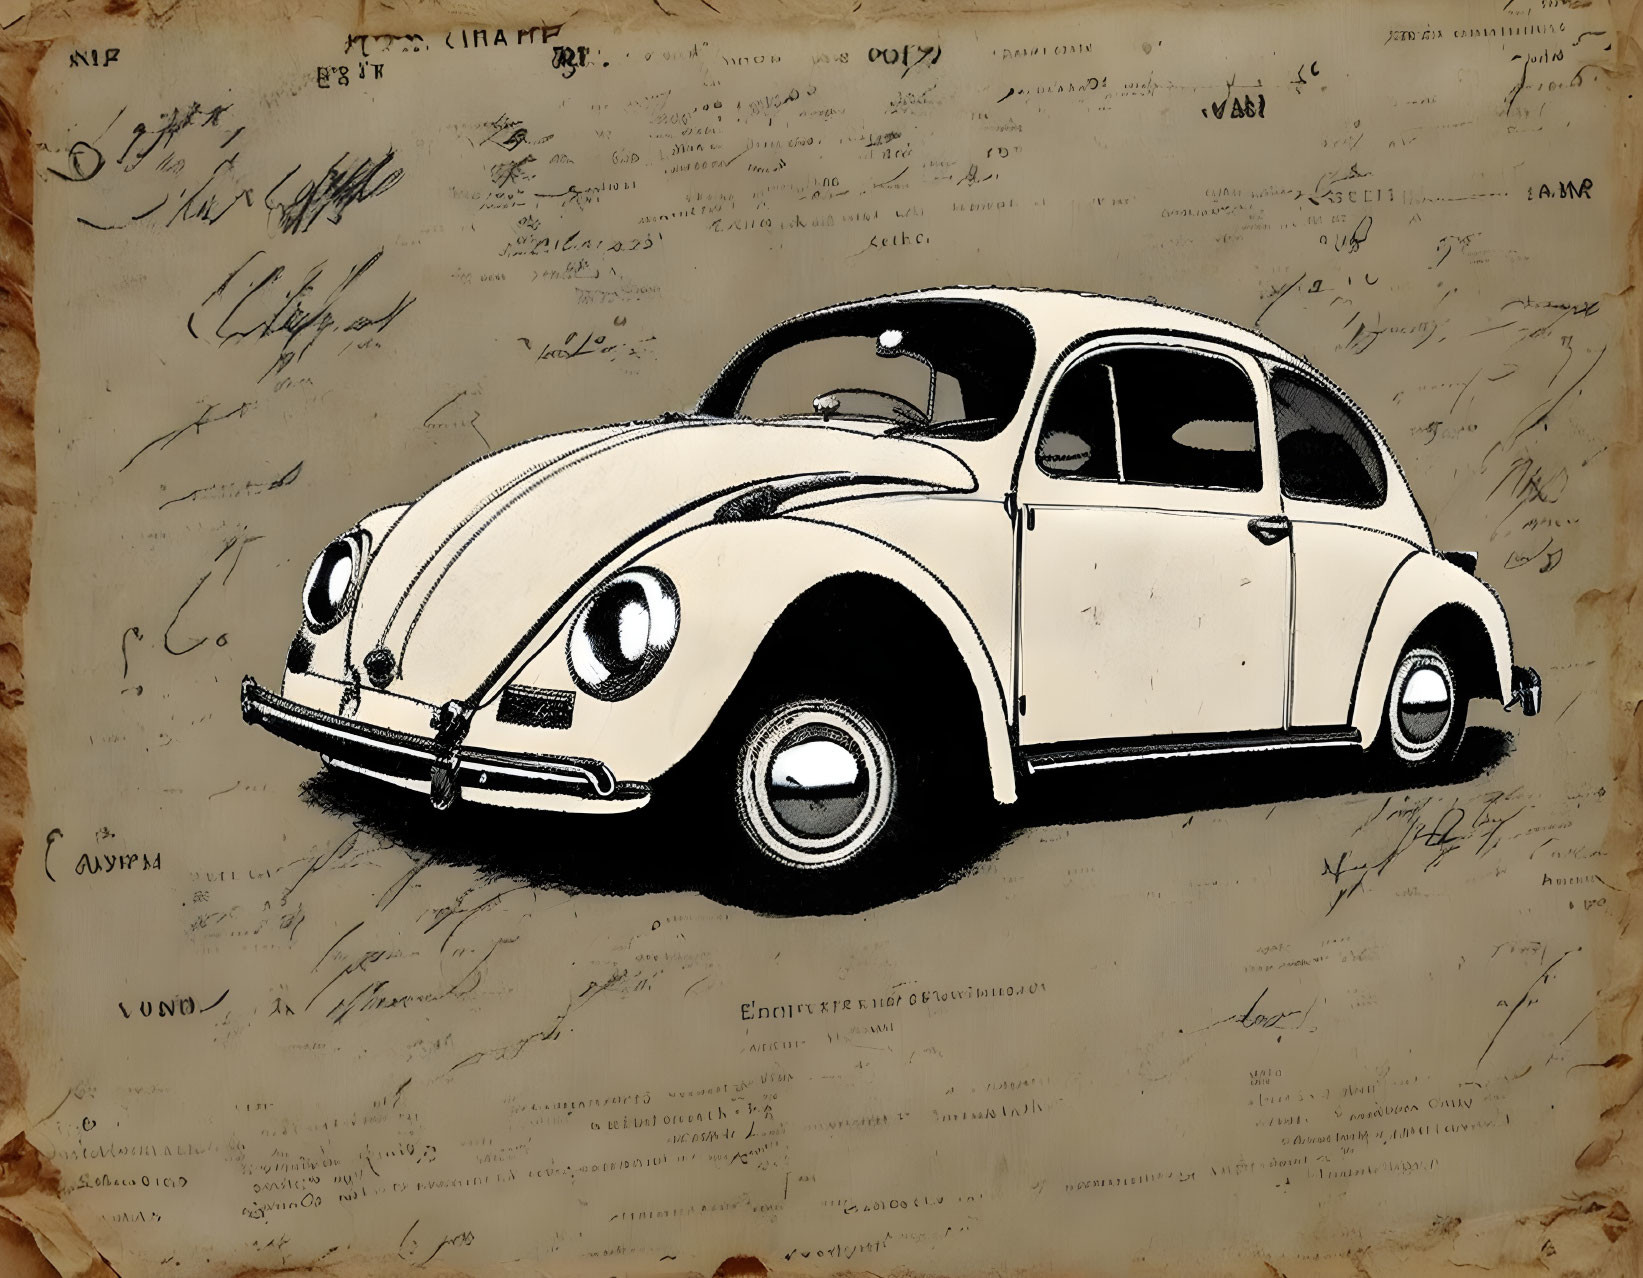 Vintage-style Illustration of Classic Volkswagen Beetle on Aged Paper Background